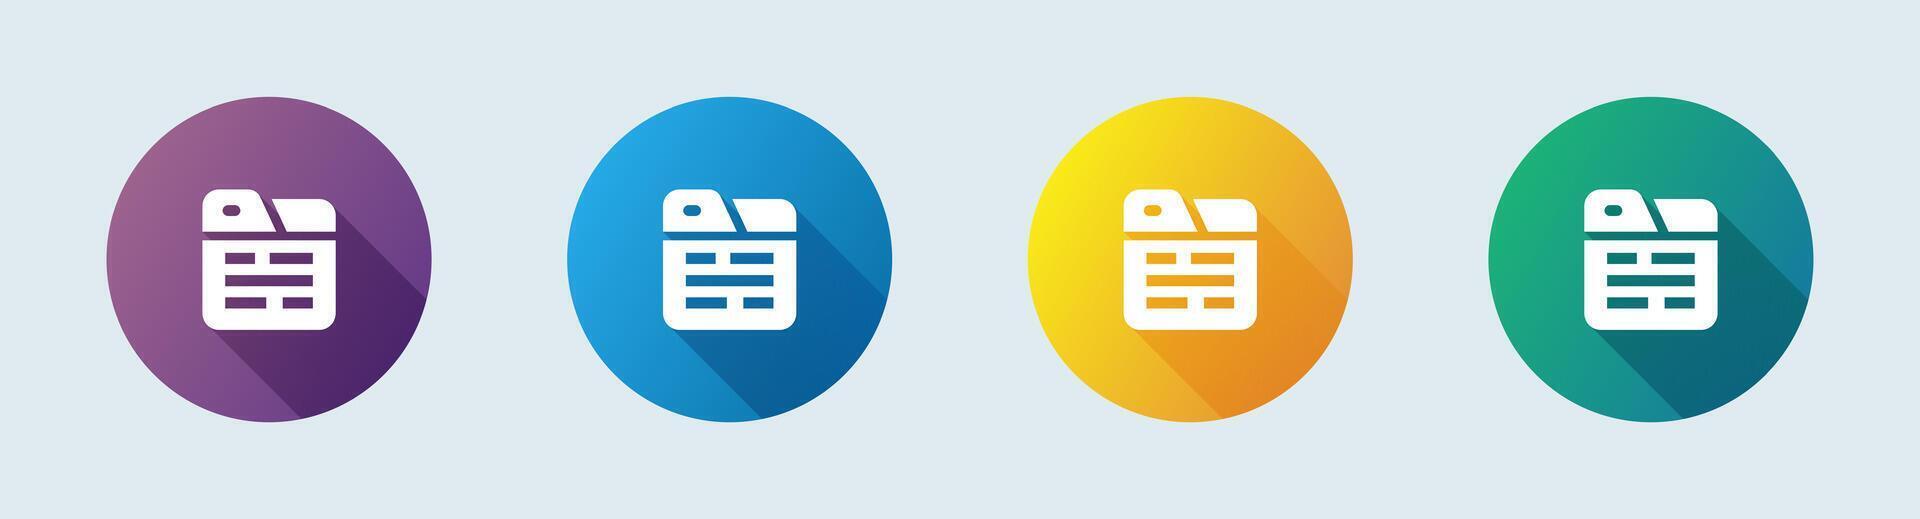 Articles solid icon in flat design style. Blog signs illustration. vector